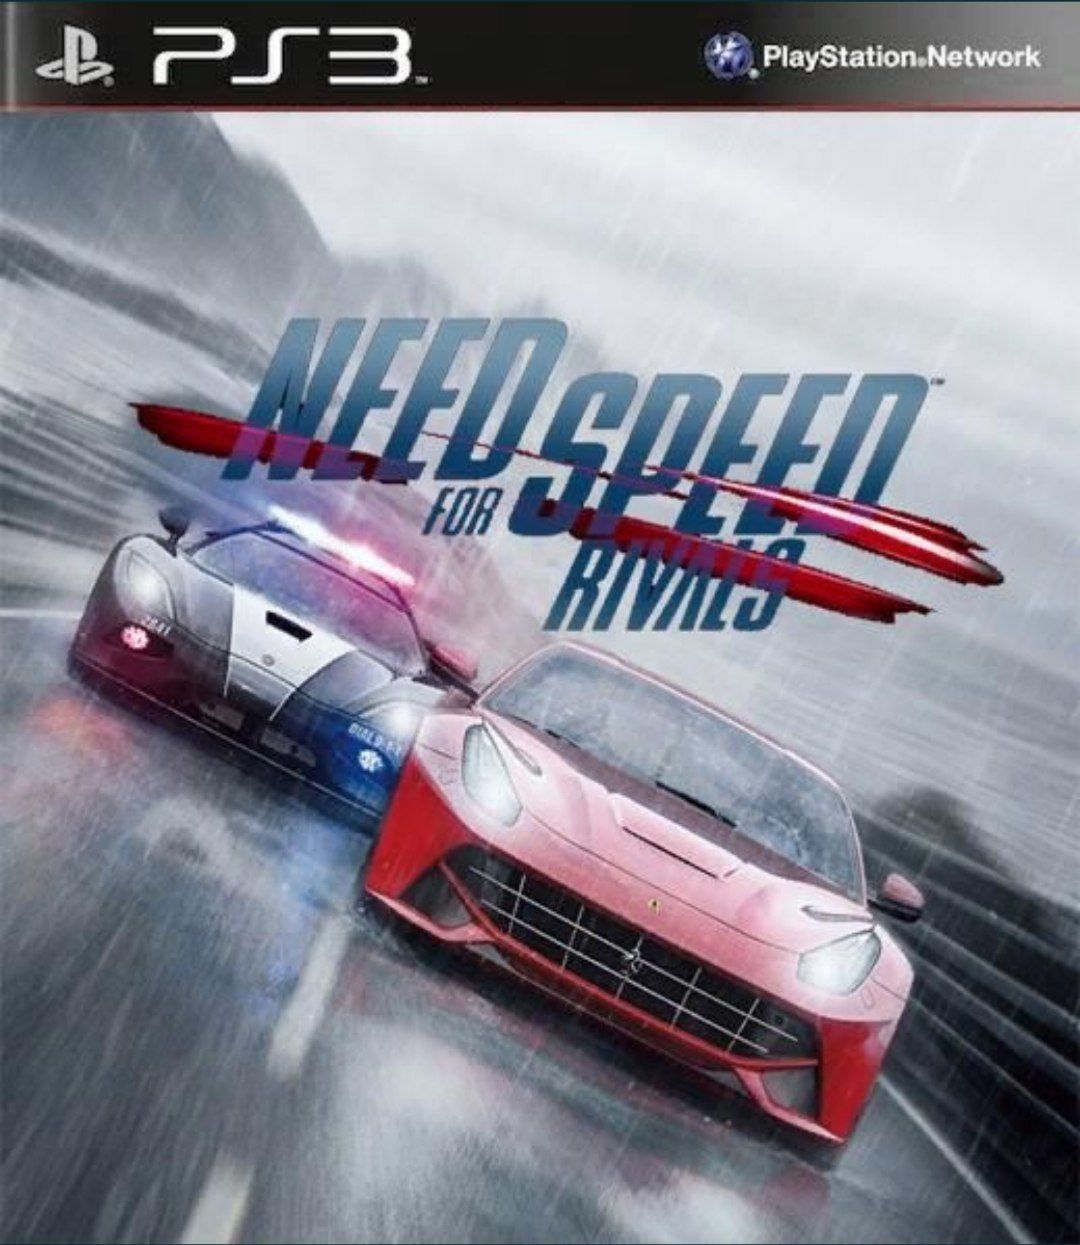 3 версия гонок. Need for Speed PLAYSTATION 3. Ps3 диск need for Speed. NFS ривалс на ПС 3. PLAYSTATION 4 игра NFS.